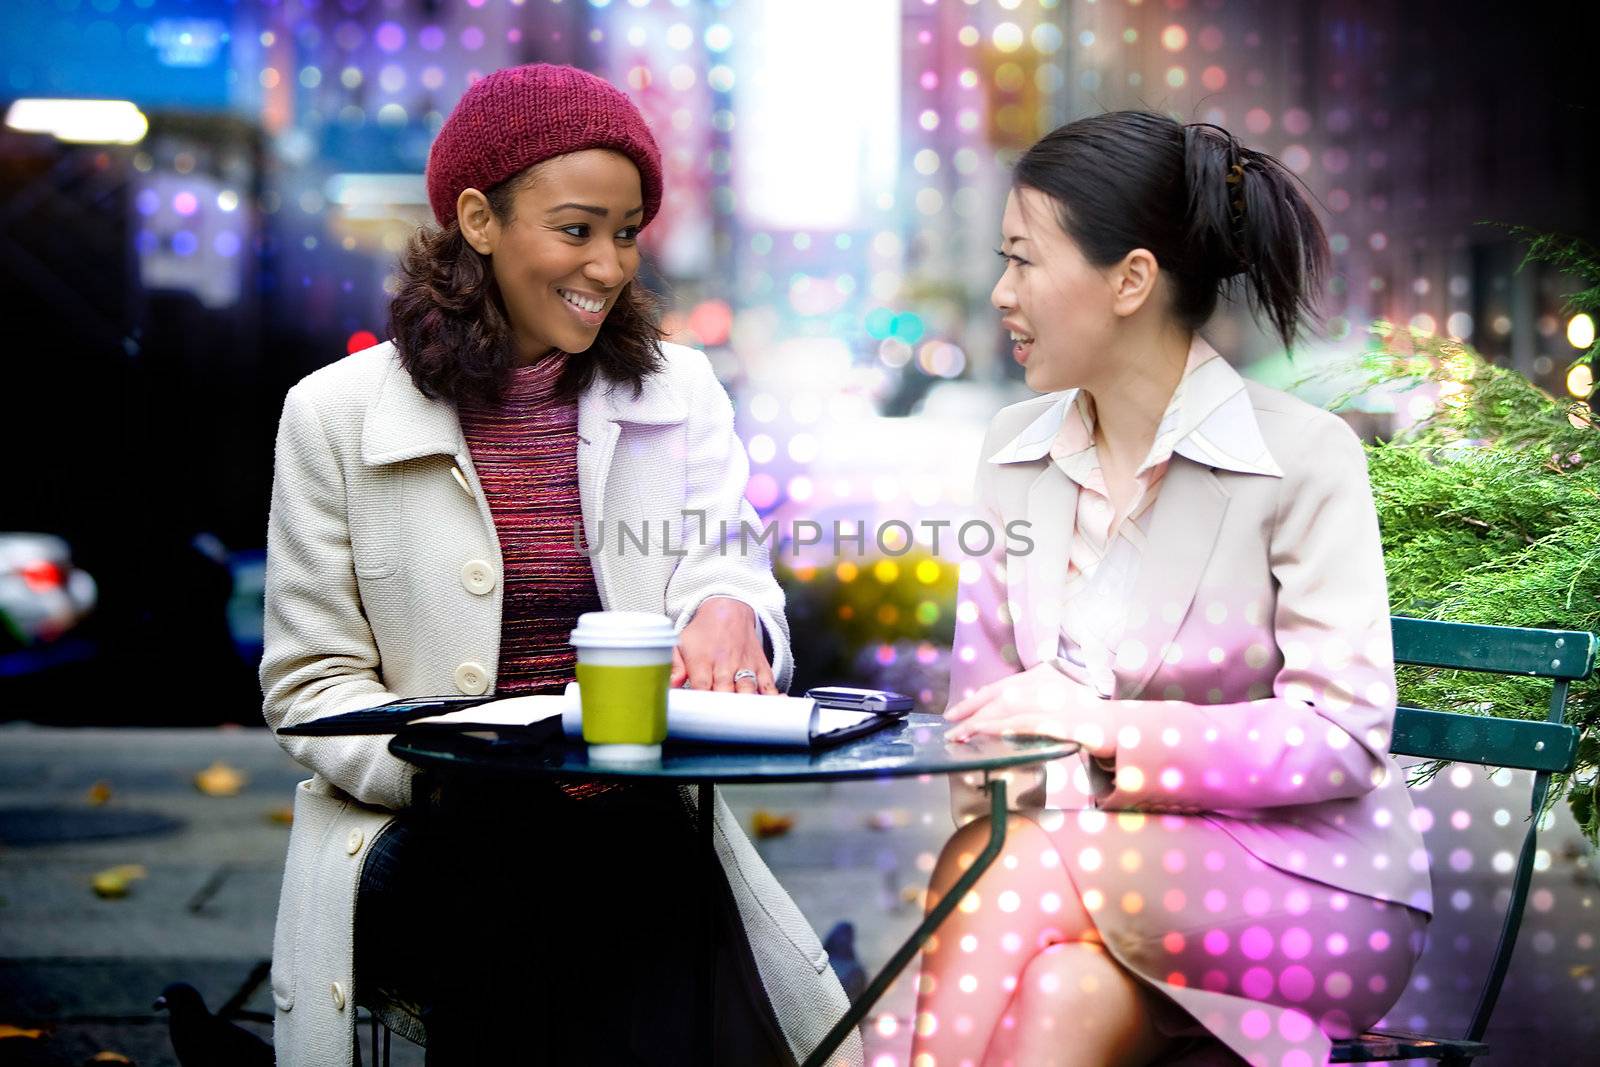 Women In a Business Meeting by graficallyminded